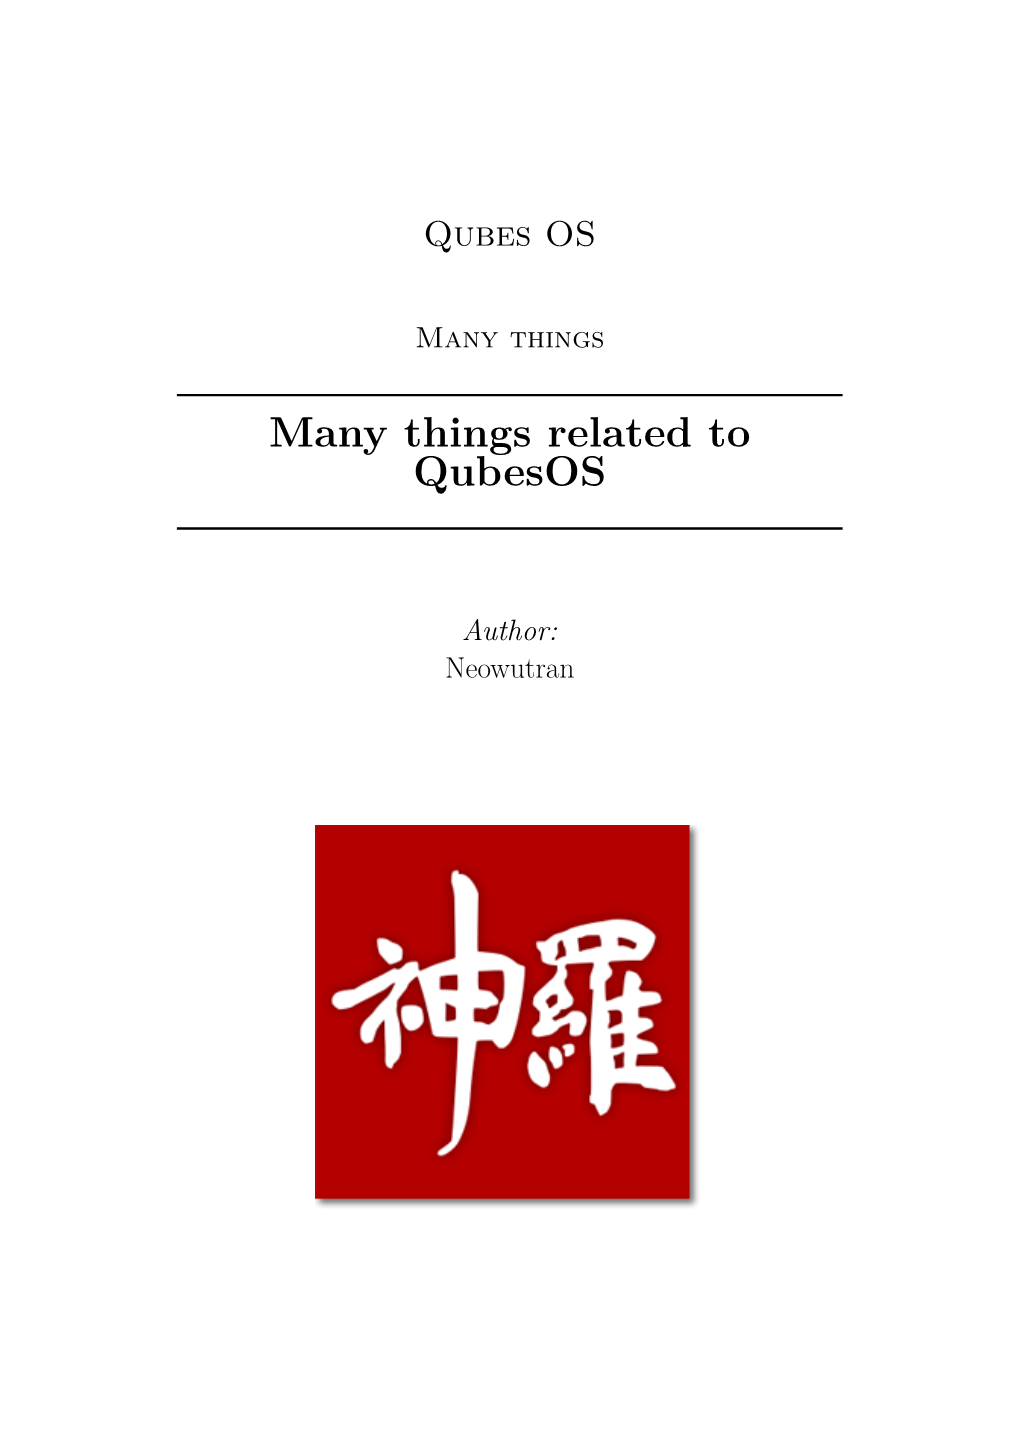 Many Things Related to Qubesos